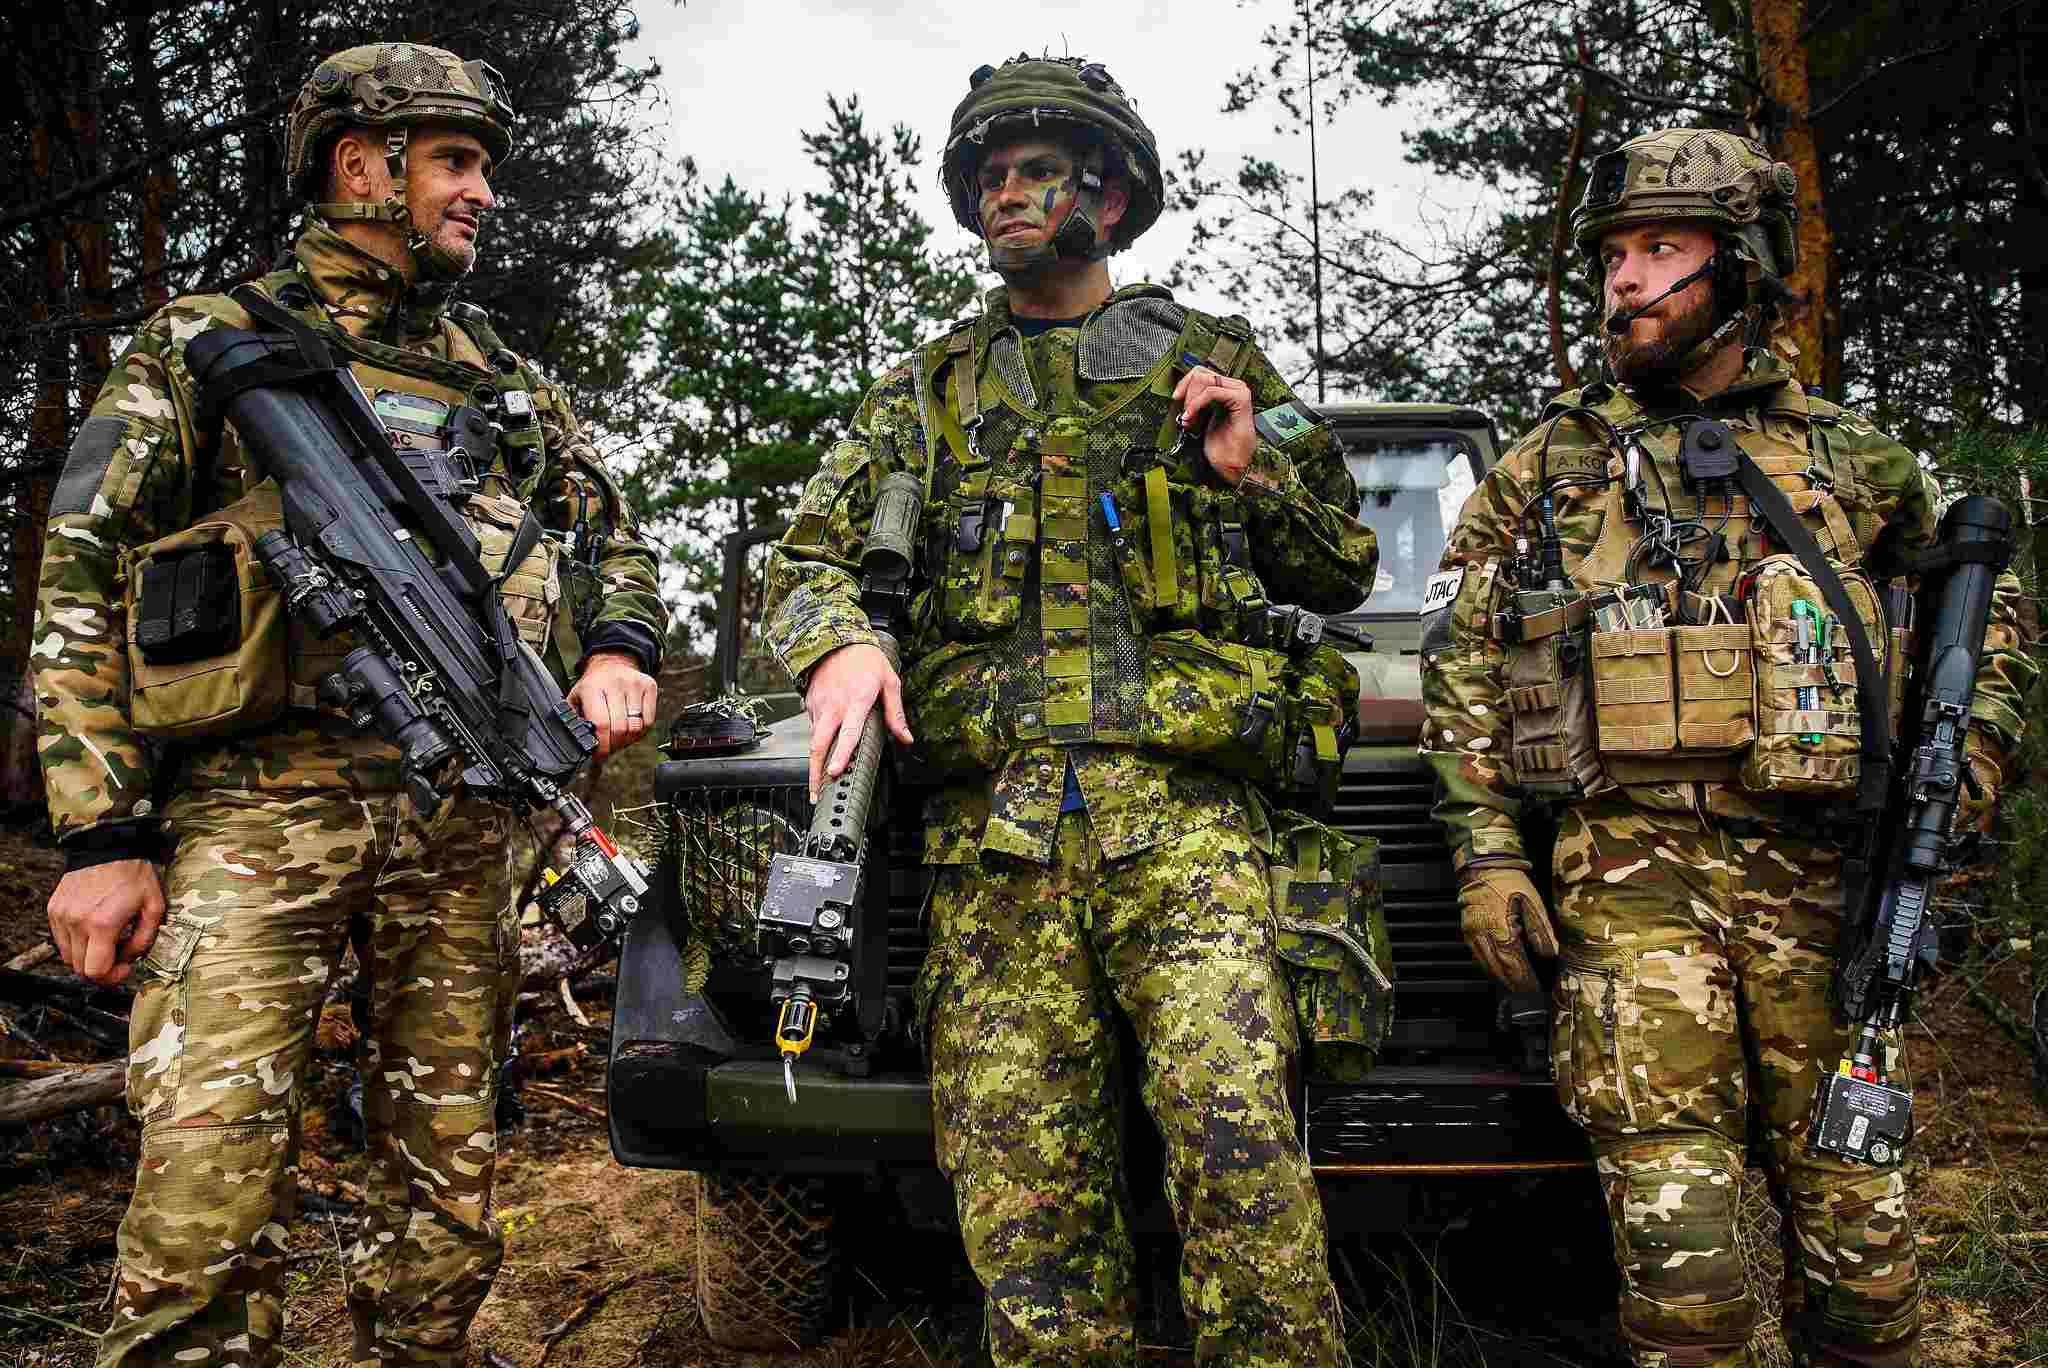 A Canadian officer from the 3rd Canadian Division speaks to members of the Slovenia J-TAC during a certification exercise. Members of the multinational battlegroup making up part of NATO's enhanced forward presence in Eastern Europe at Camp Adazi in Latvia. Credit: NATO